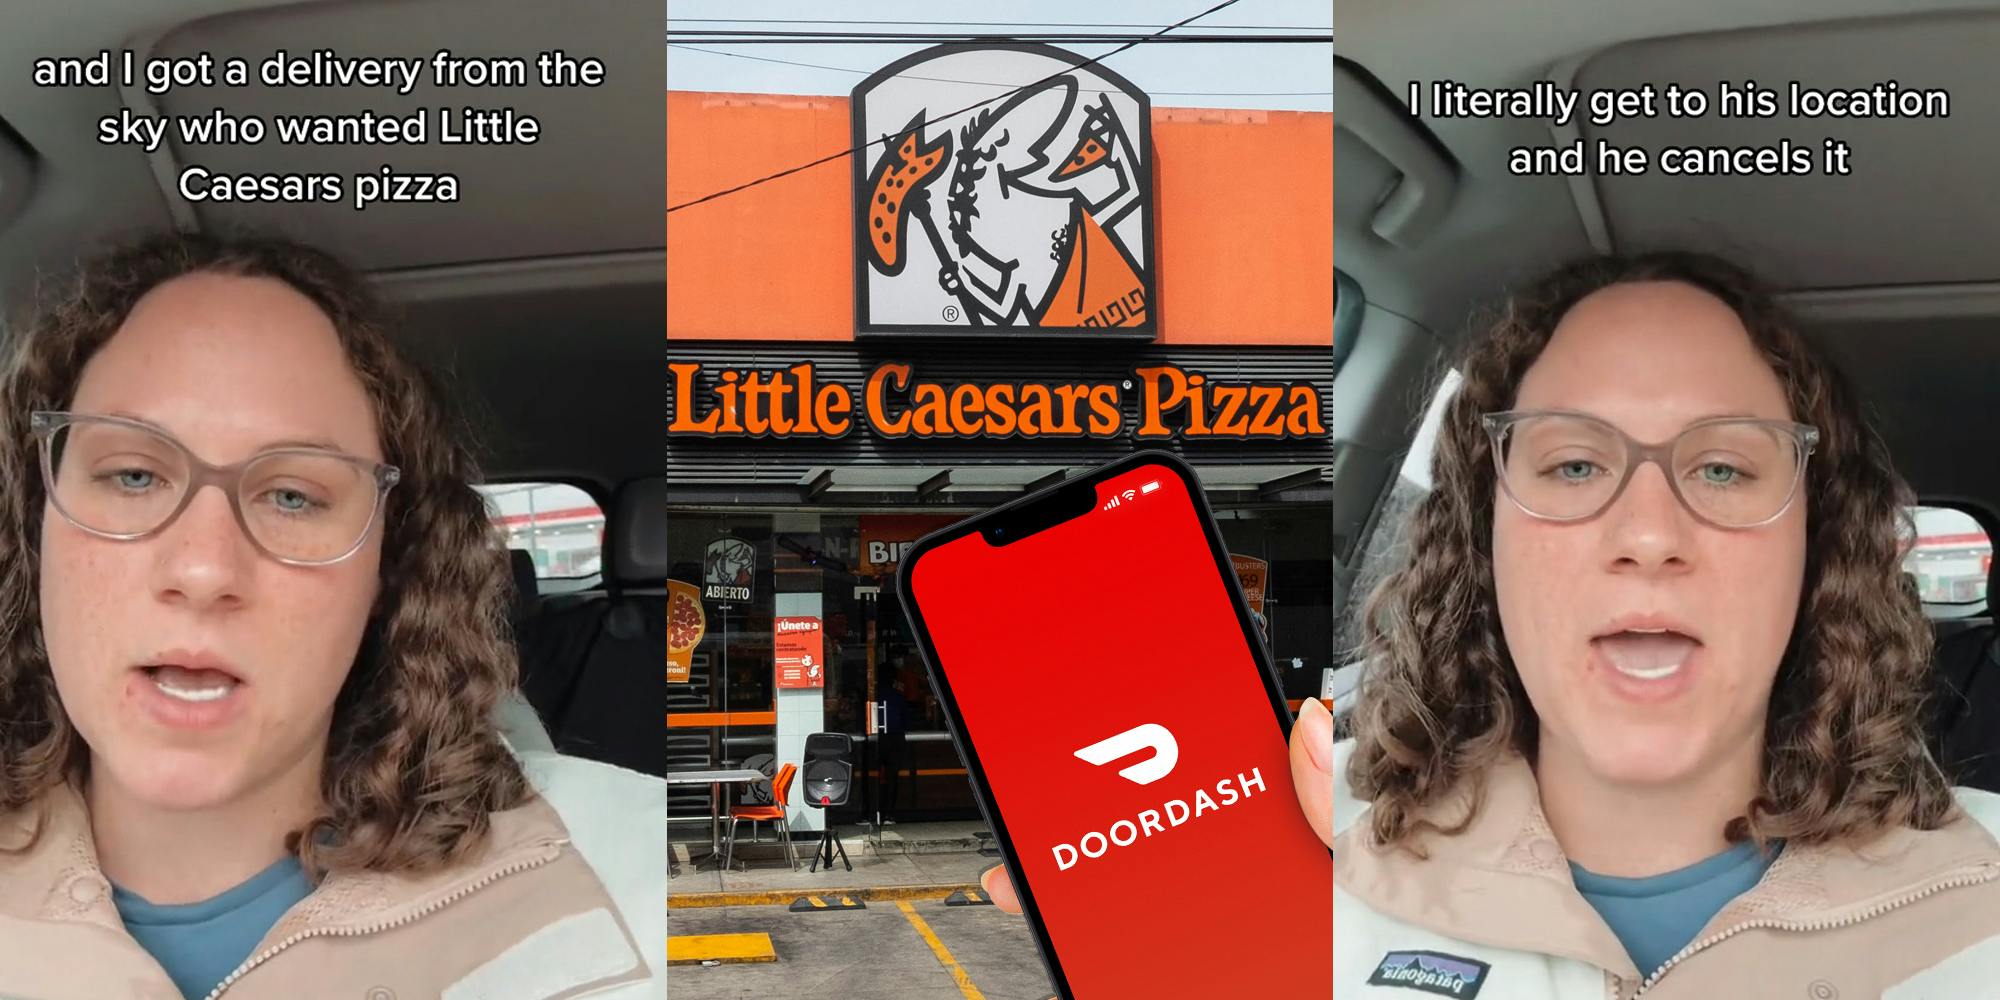 DoorDash driver speaking in car caption and I got a delivery from this guy who wanted Little Caesars pizza" (l) hand holding phone with DoorDash on screen in front f Little Caesars building (c) DoorDash driver speaking in car caption "I literally get to his location and he cancels it" (r)